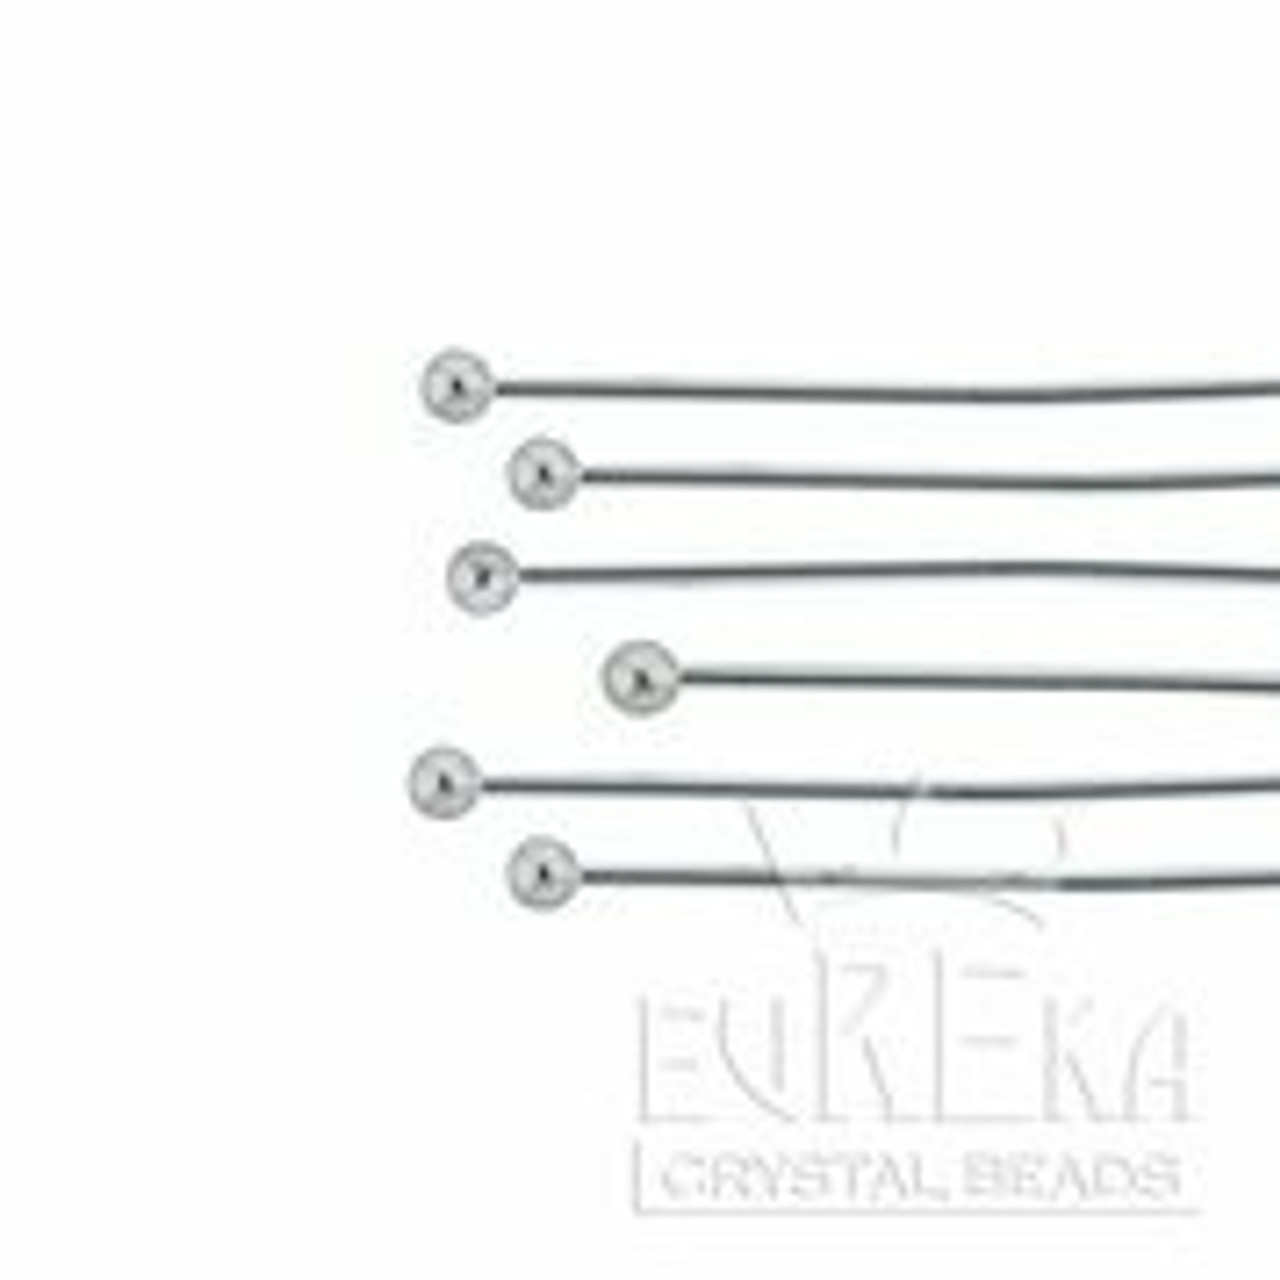 Bronze Ball End Head Pins for Jewelry Making